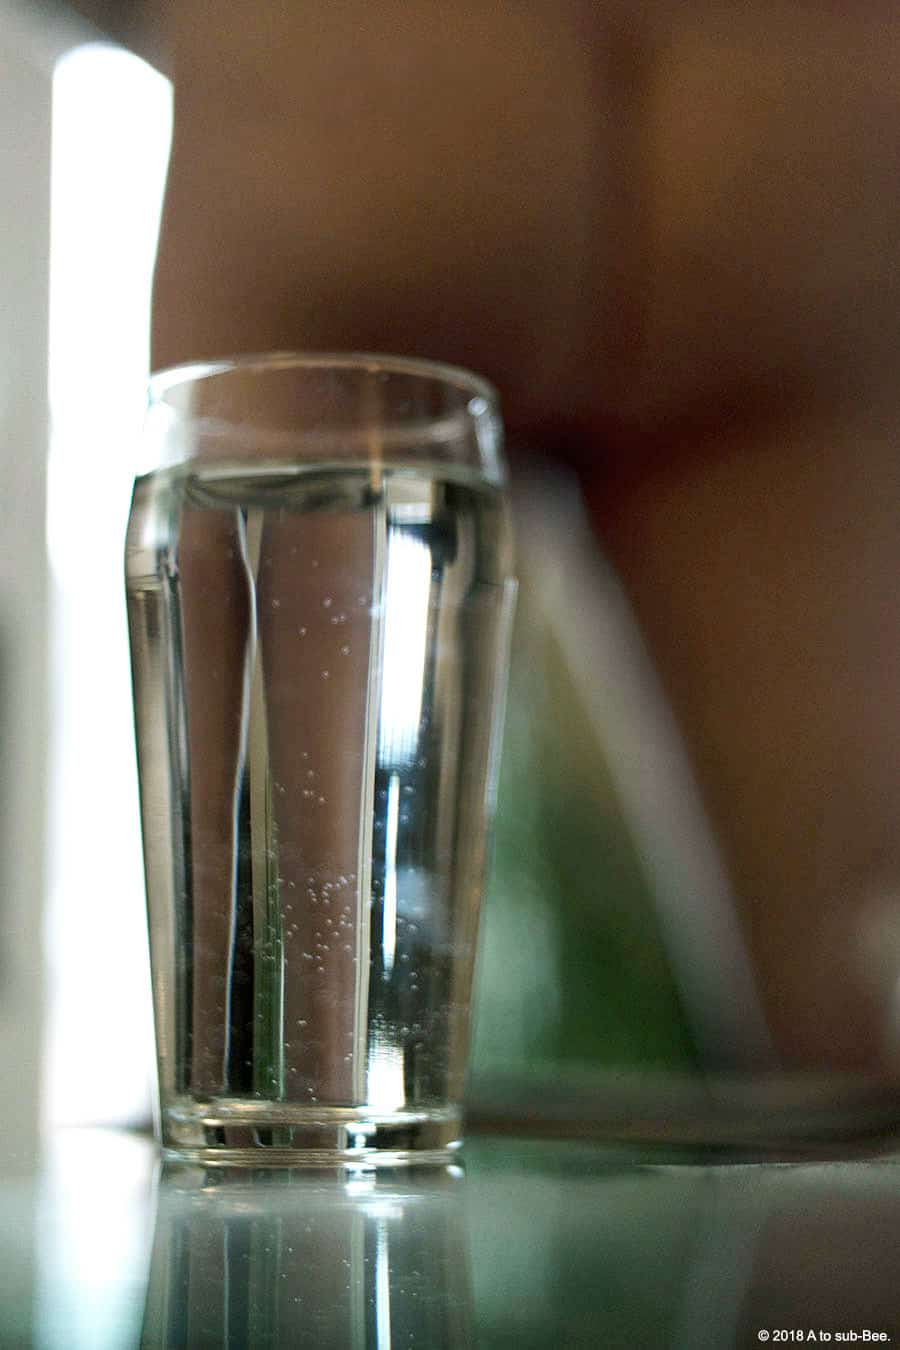 An image of Bee's bottom with a glass of water hiding one leg but through the glass you see Bee's legs